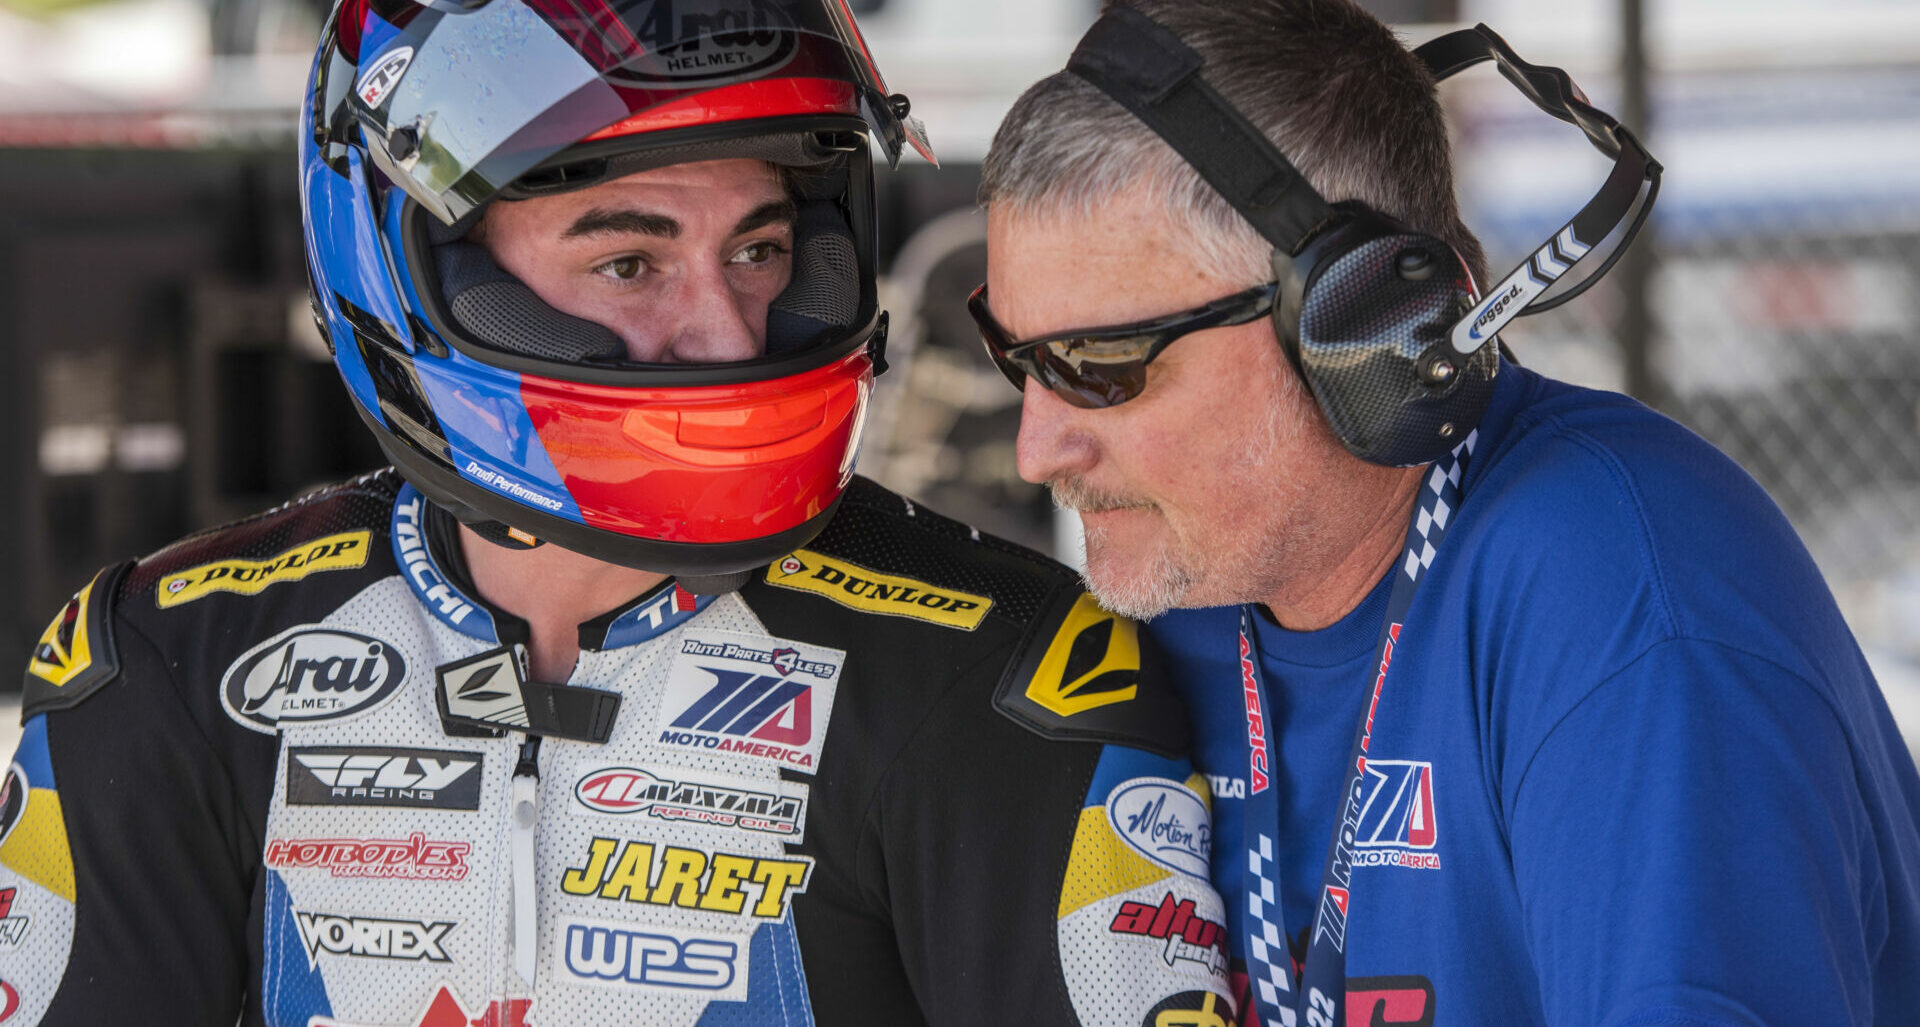 Eric Gray (right) with Jaret Nassaney (left) during the MotoAmerica event at Road Atlanta in 2022. Photo by Brian J. Nelson.